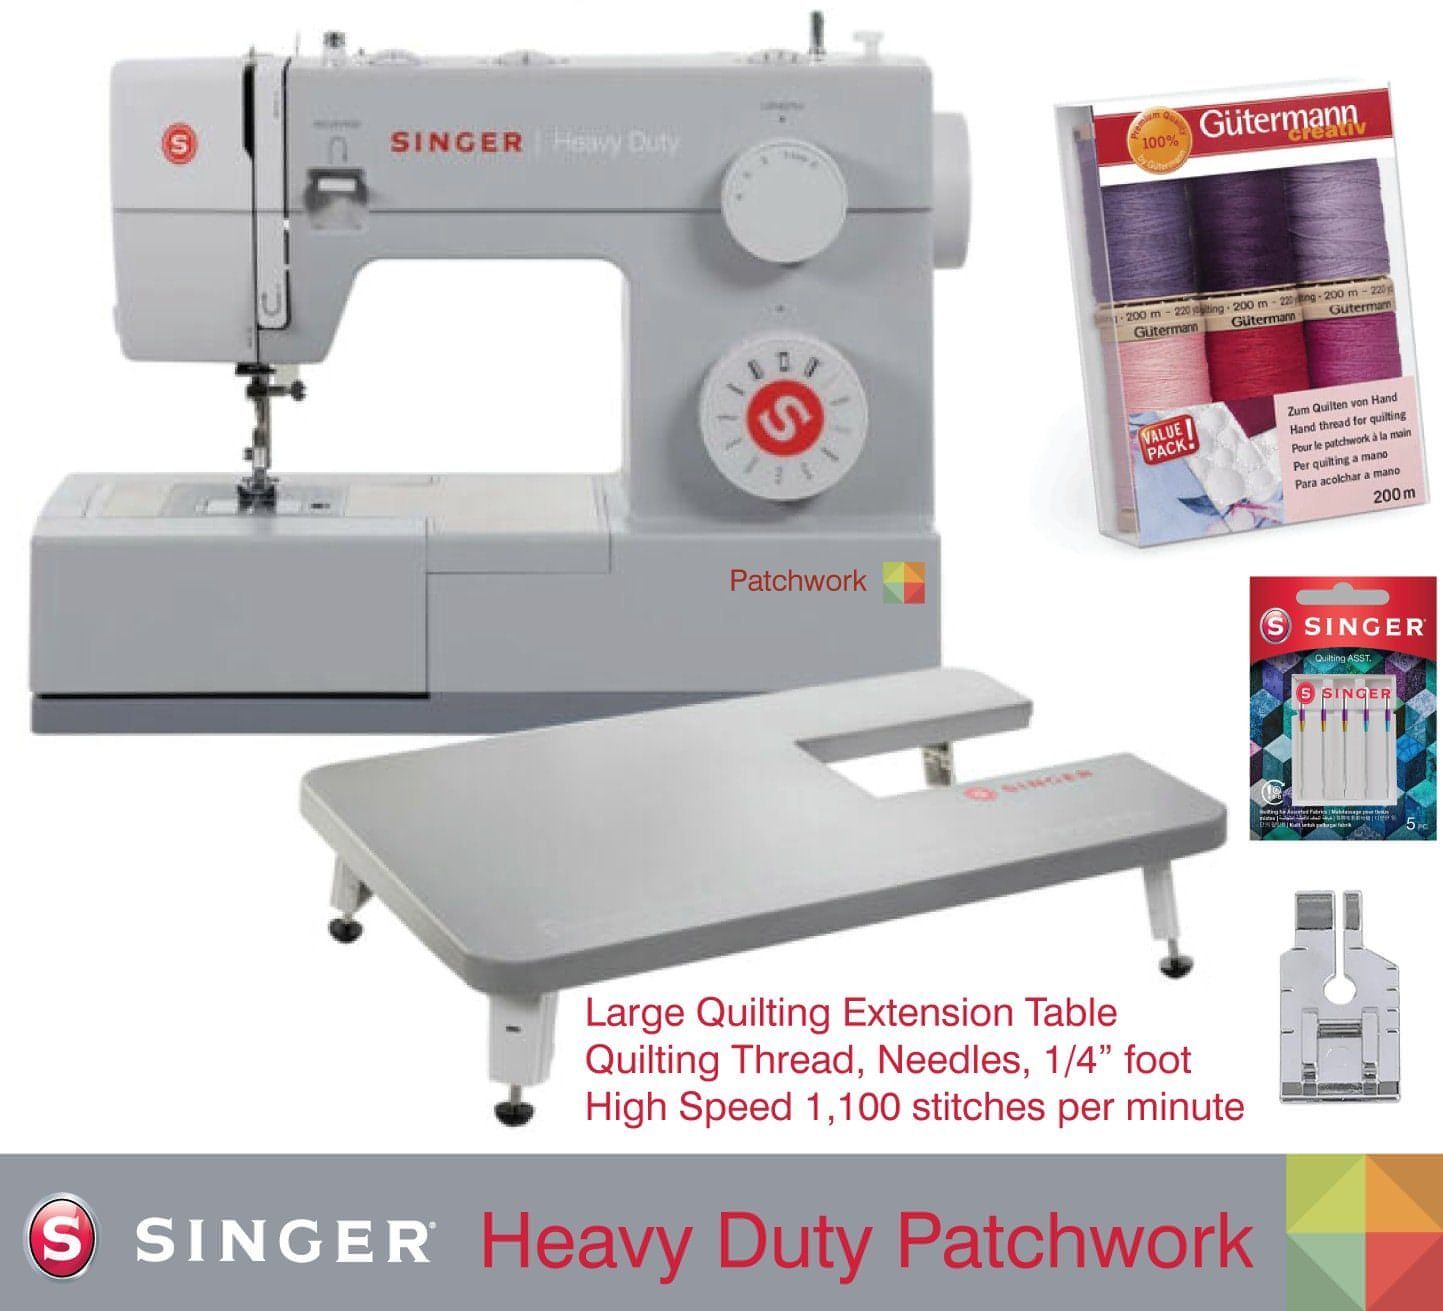 Singer Heavy Duty Patchwork Edition Sewing Machine